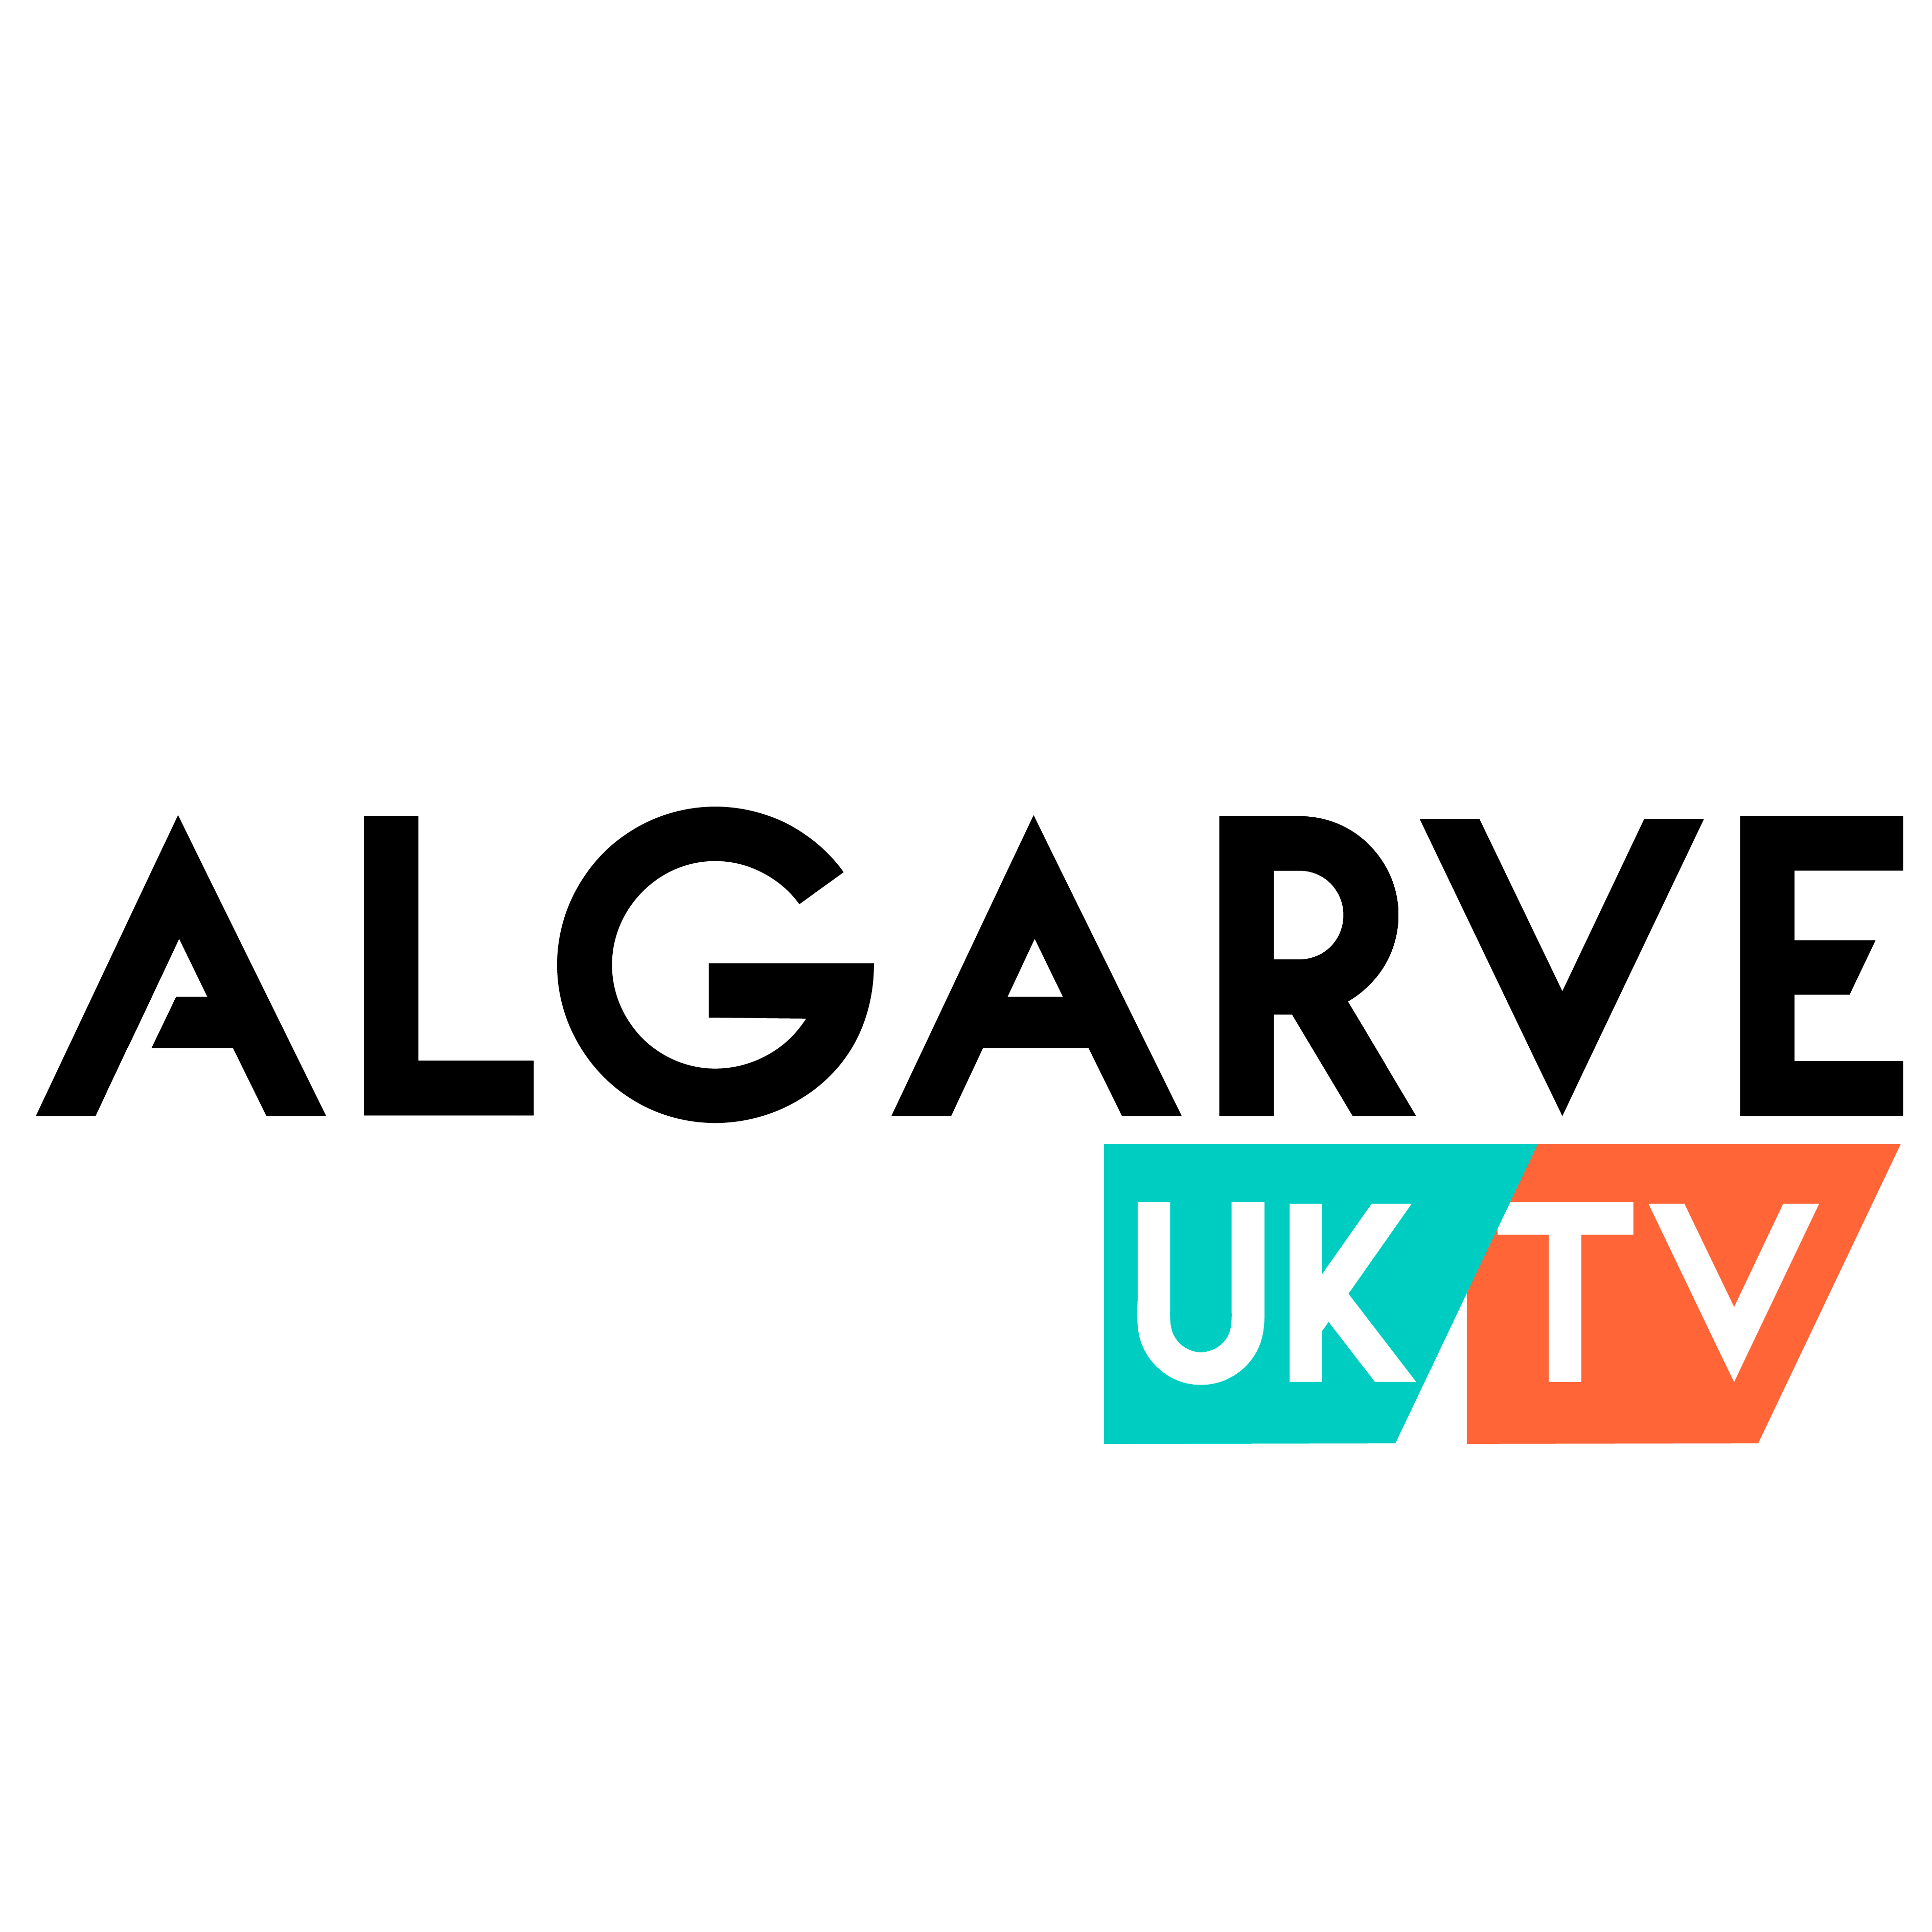 #UKTV live channels in HD for FREE. Get your BBC, ITV and others in the #Algarve. Ideal for #British #tourists or #expats. Sale & renting. Full maintenance.